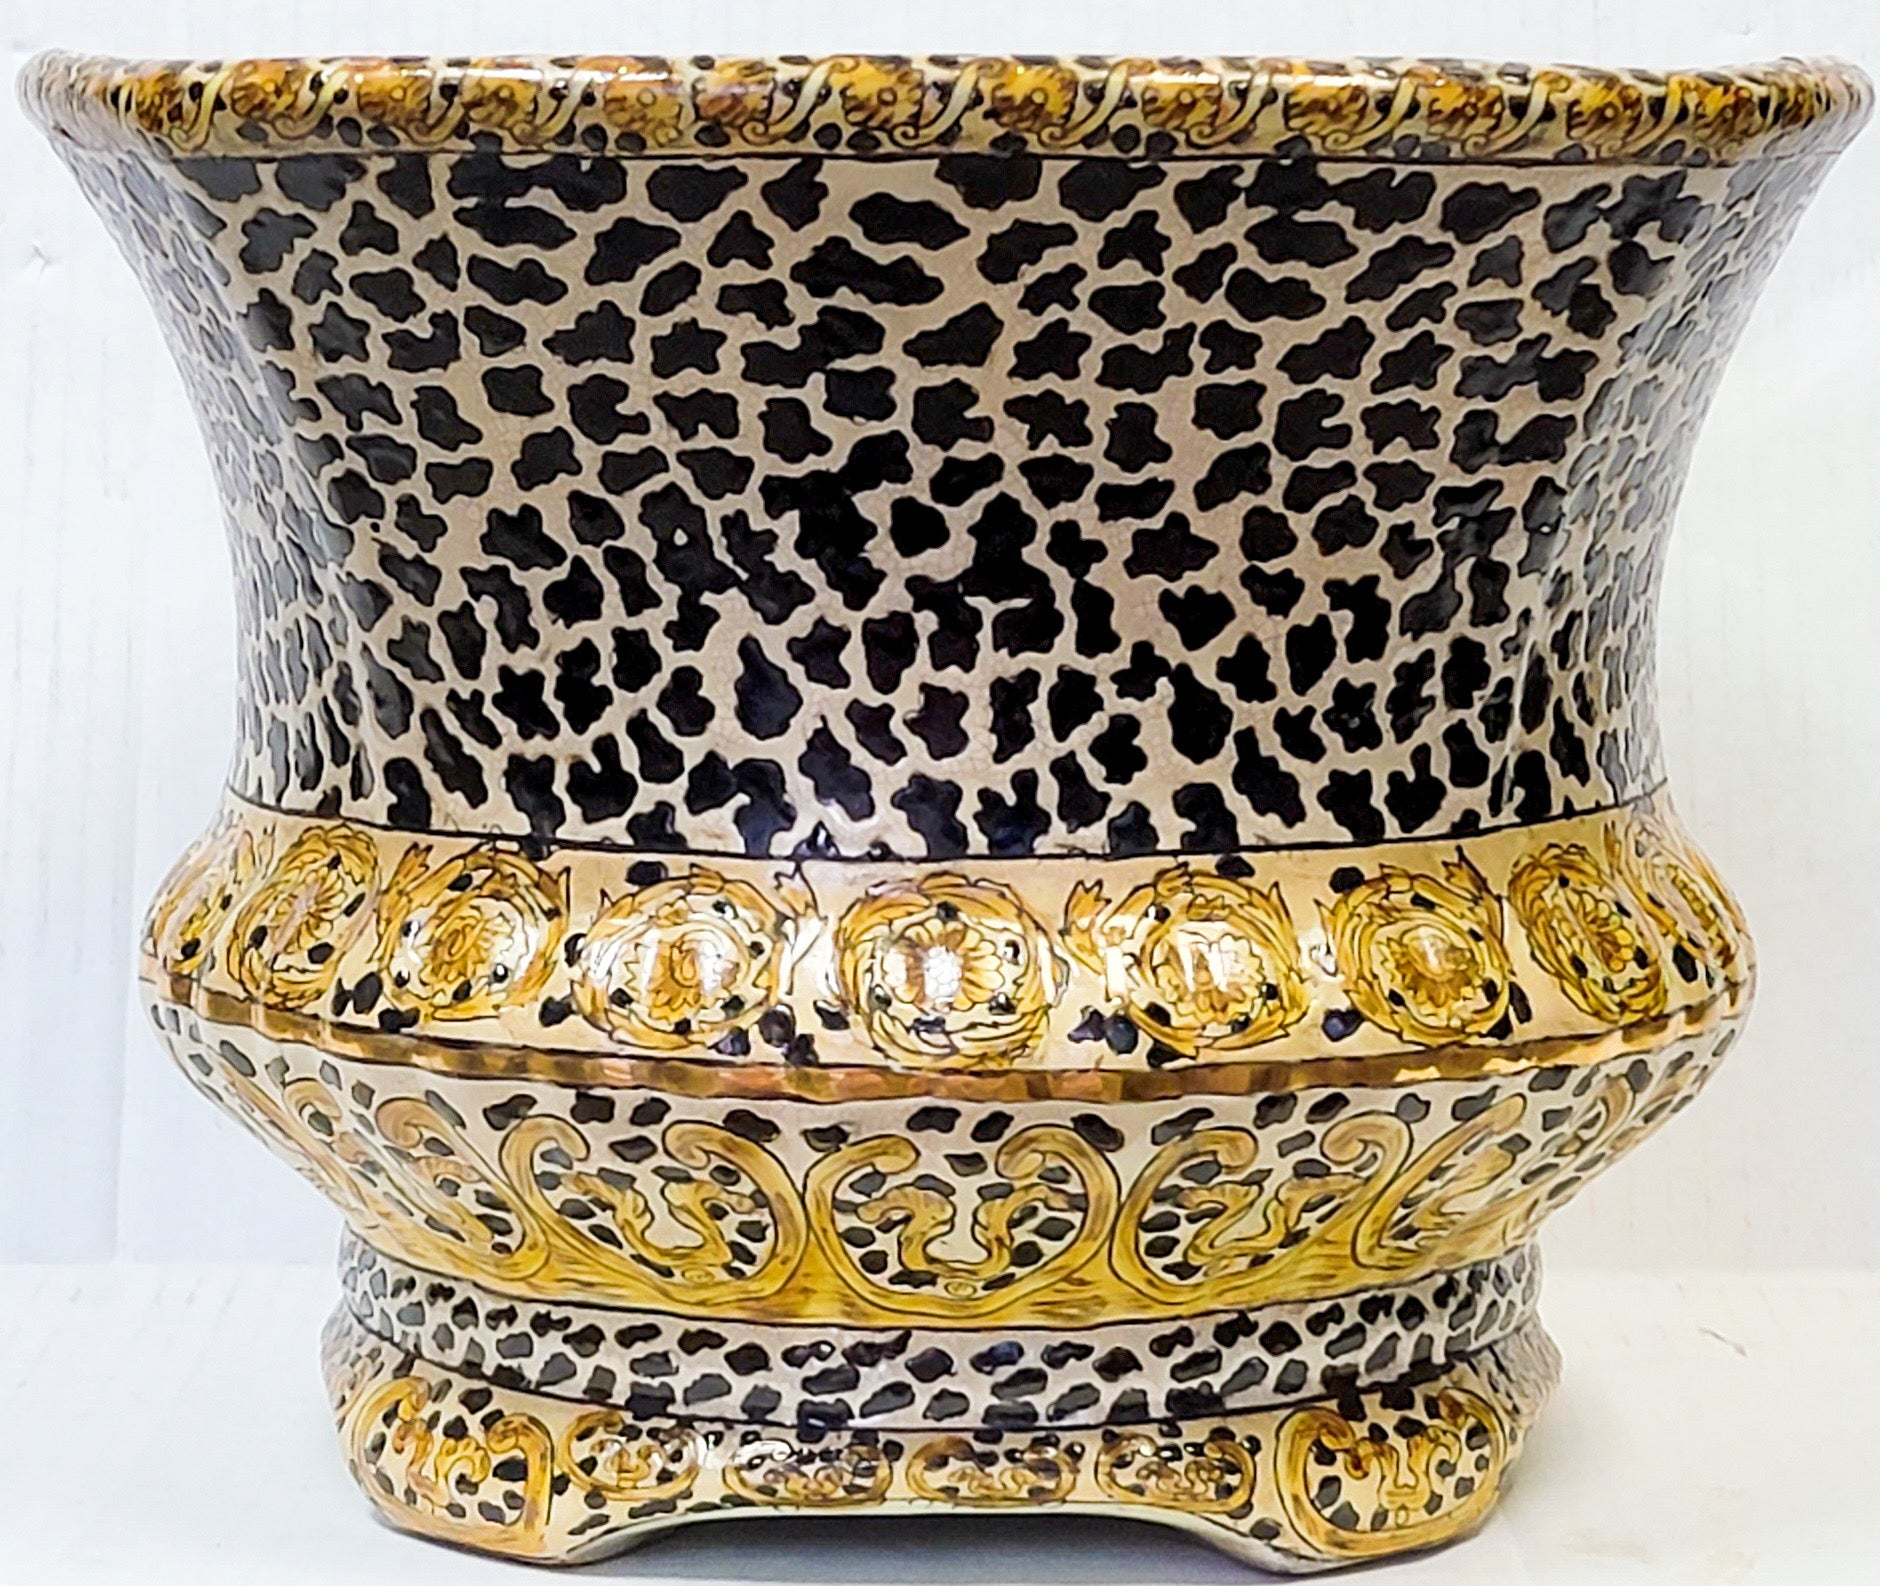 Asian Late 20th-C. Large Chinese Export Style Leopard Motif Planter / Cachepot / Vase